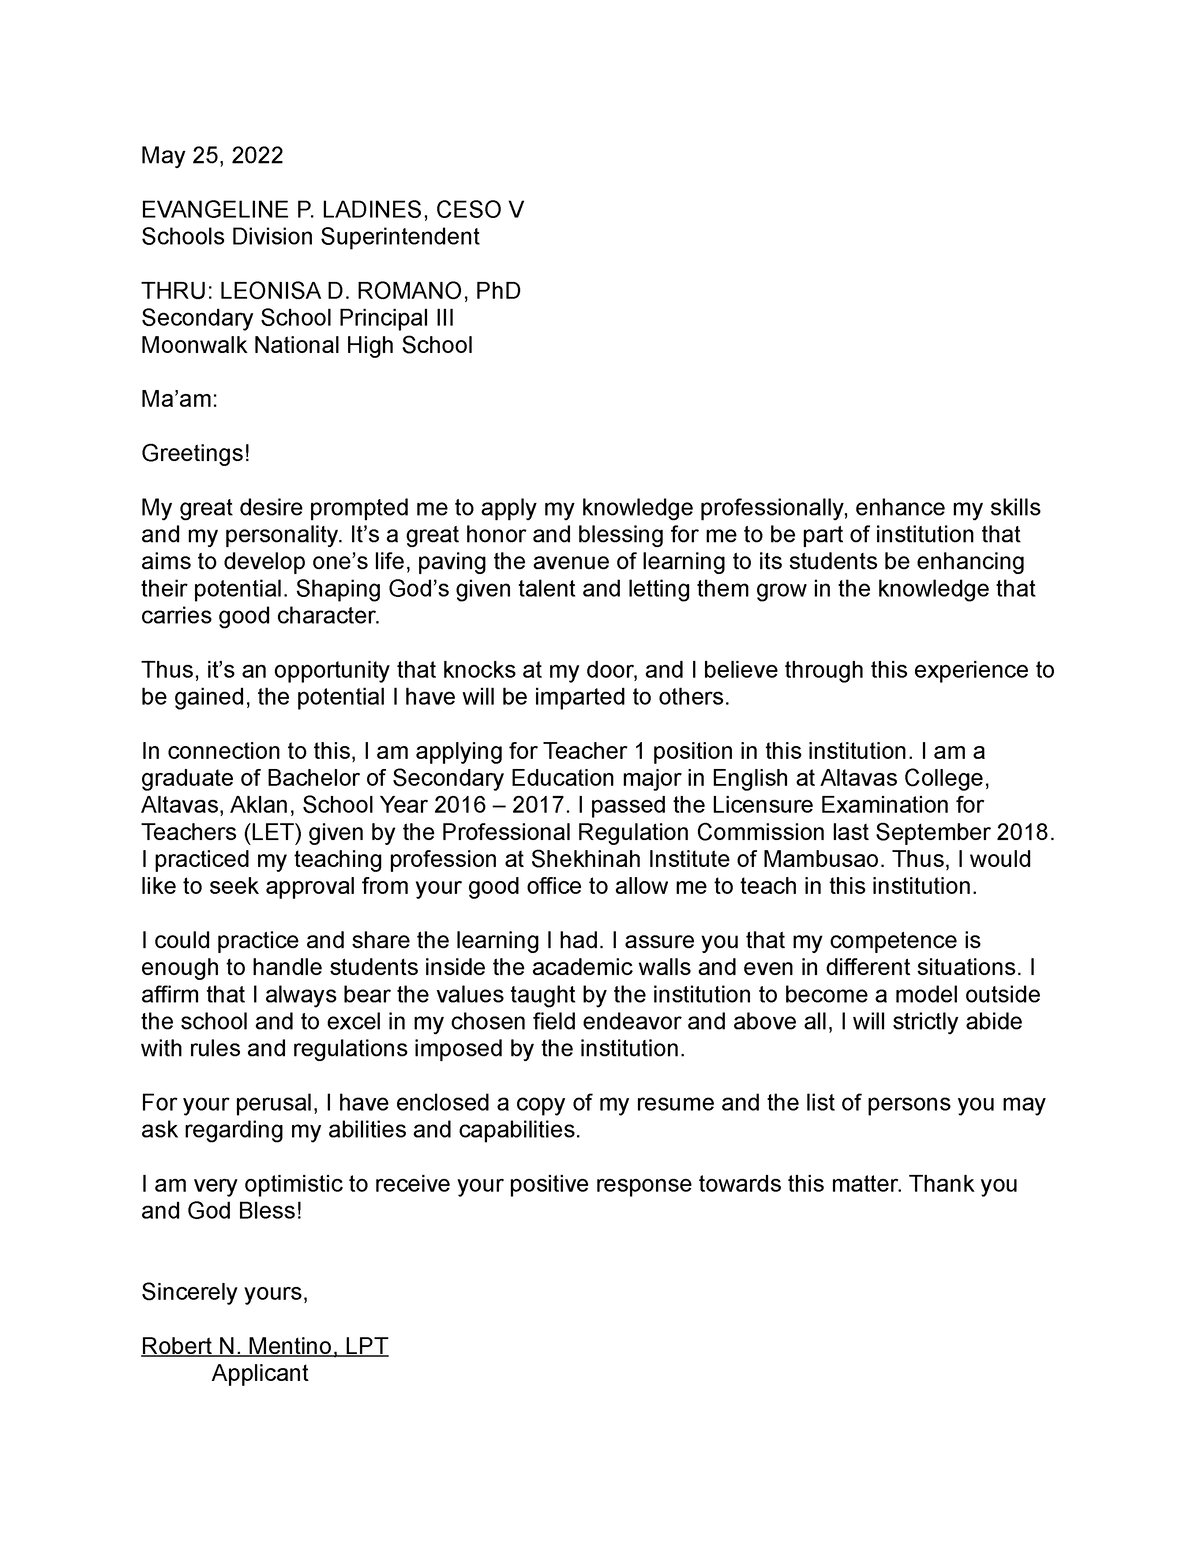 Robert- Application- Letter - May 25, 2022 EVANGELINE P. LADINES, CESO ...